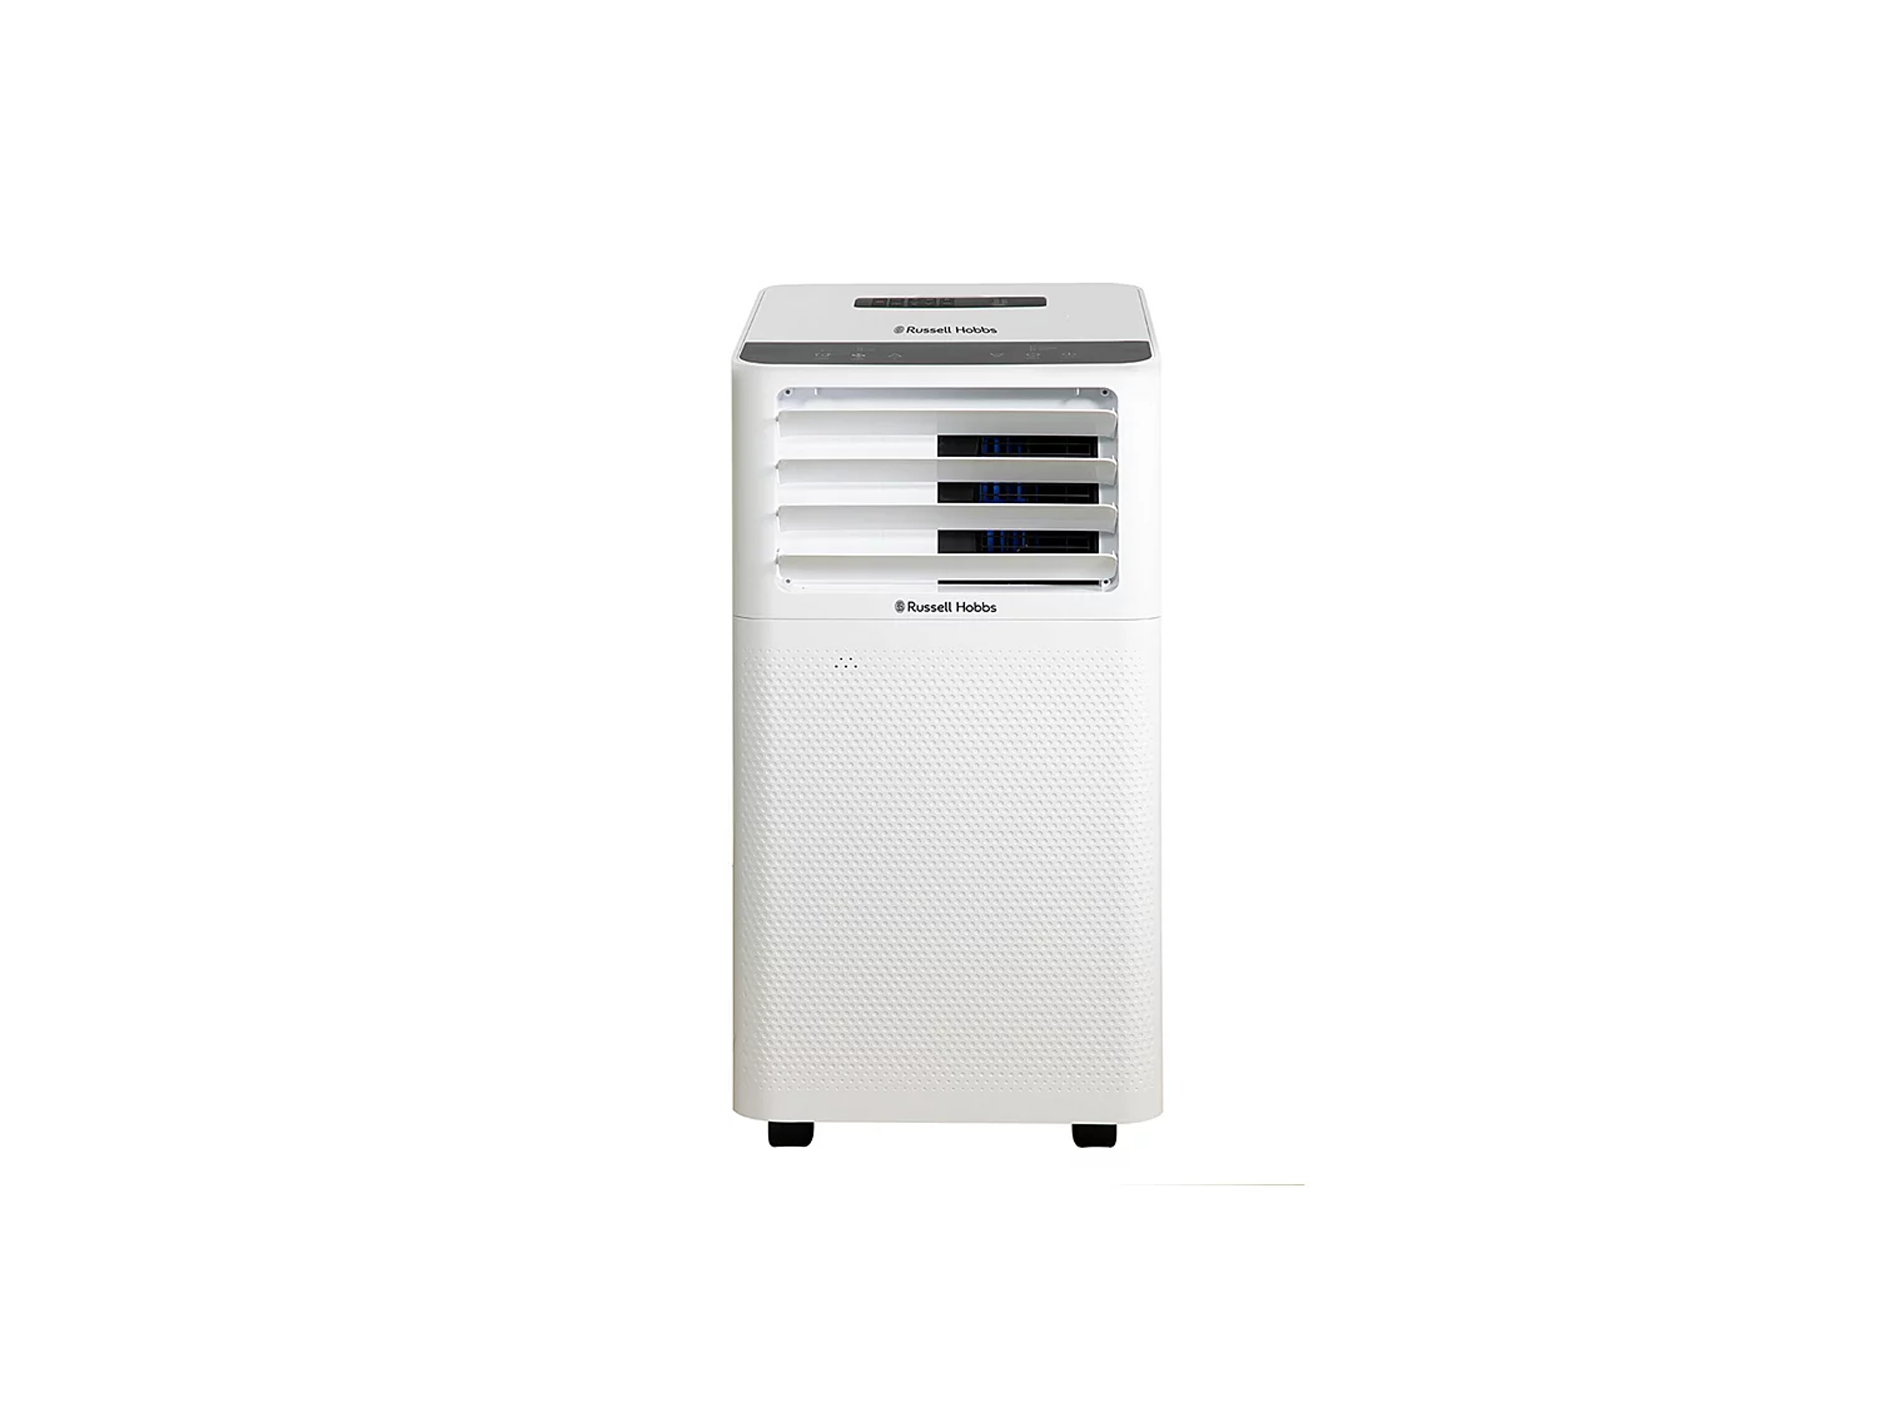 Russell Hobbs RHPAC3001, best portable air conditioner